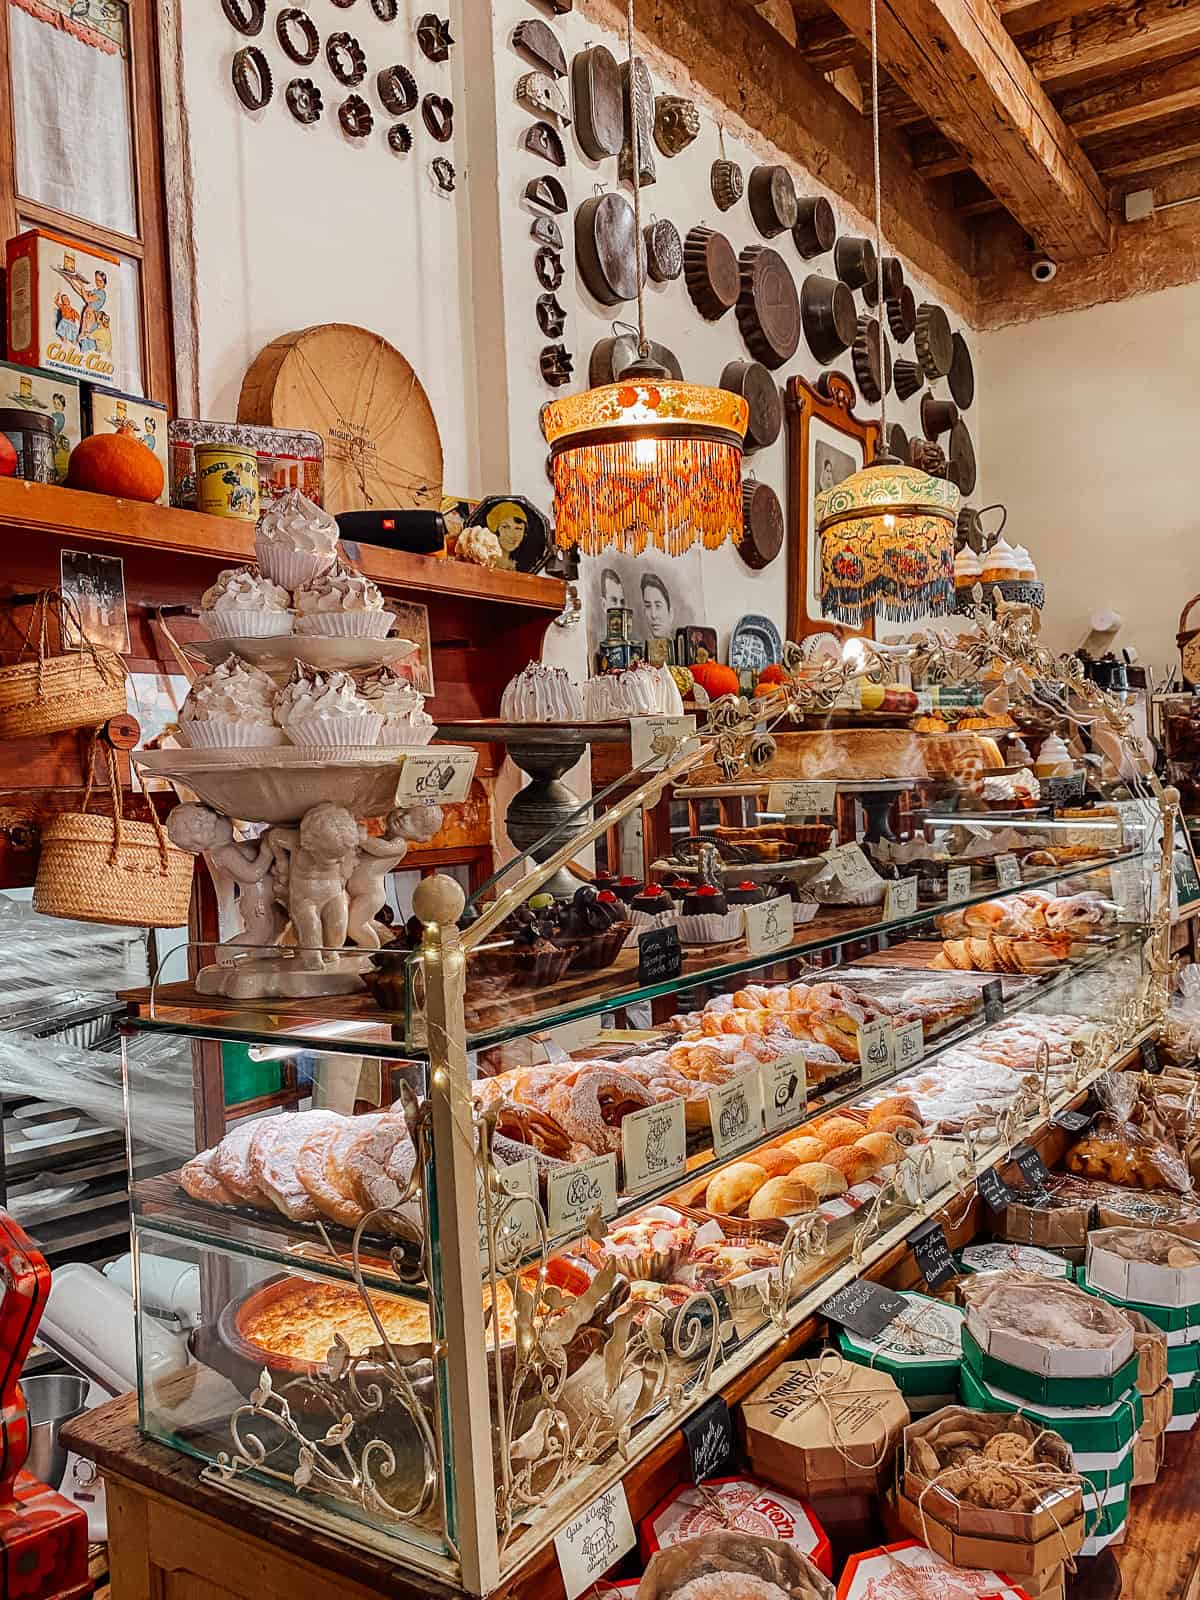 A bakery in Mallorca with many pastries